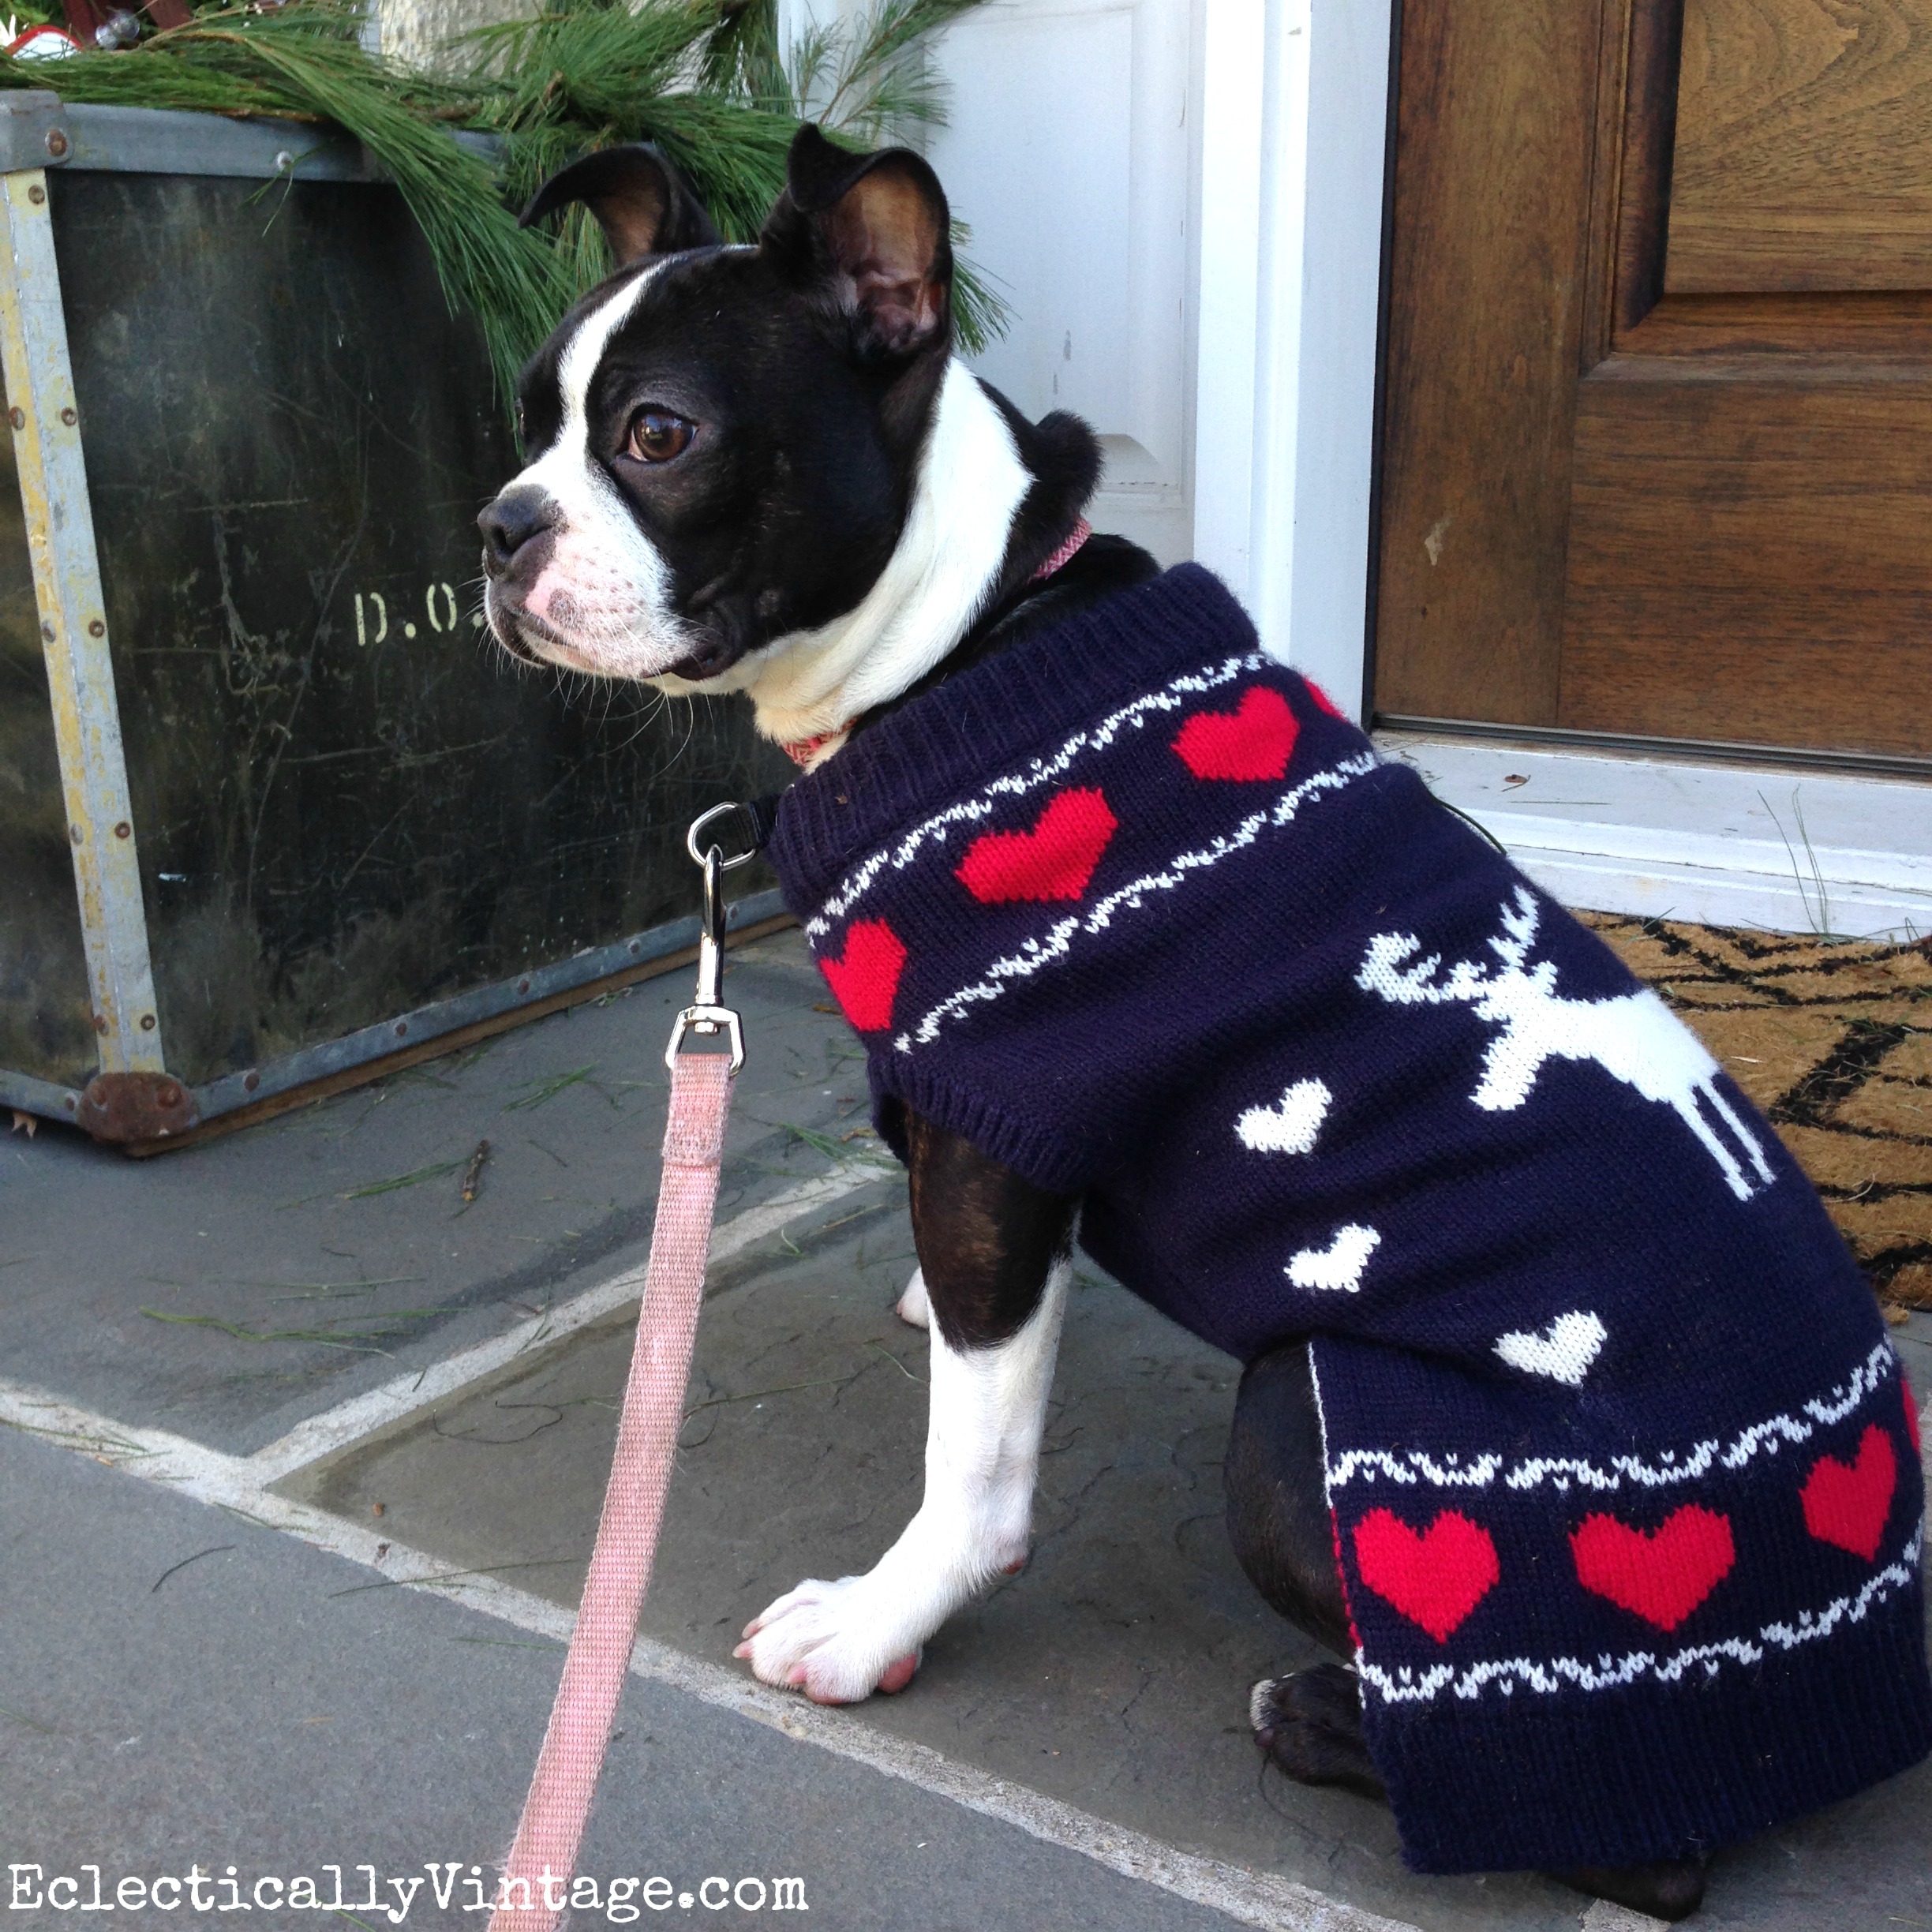 Dogs in Sweaters! Love this sweater on this Boston Terrier kellyelko.com #petclothes #dogclothes #dogsweater #bostonterrier #kellyelko